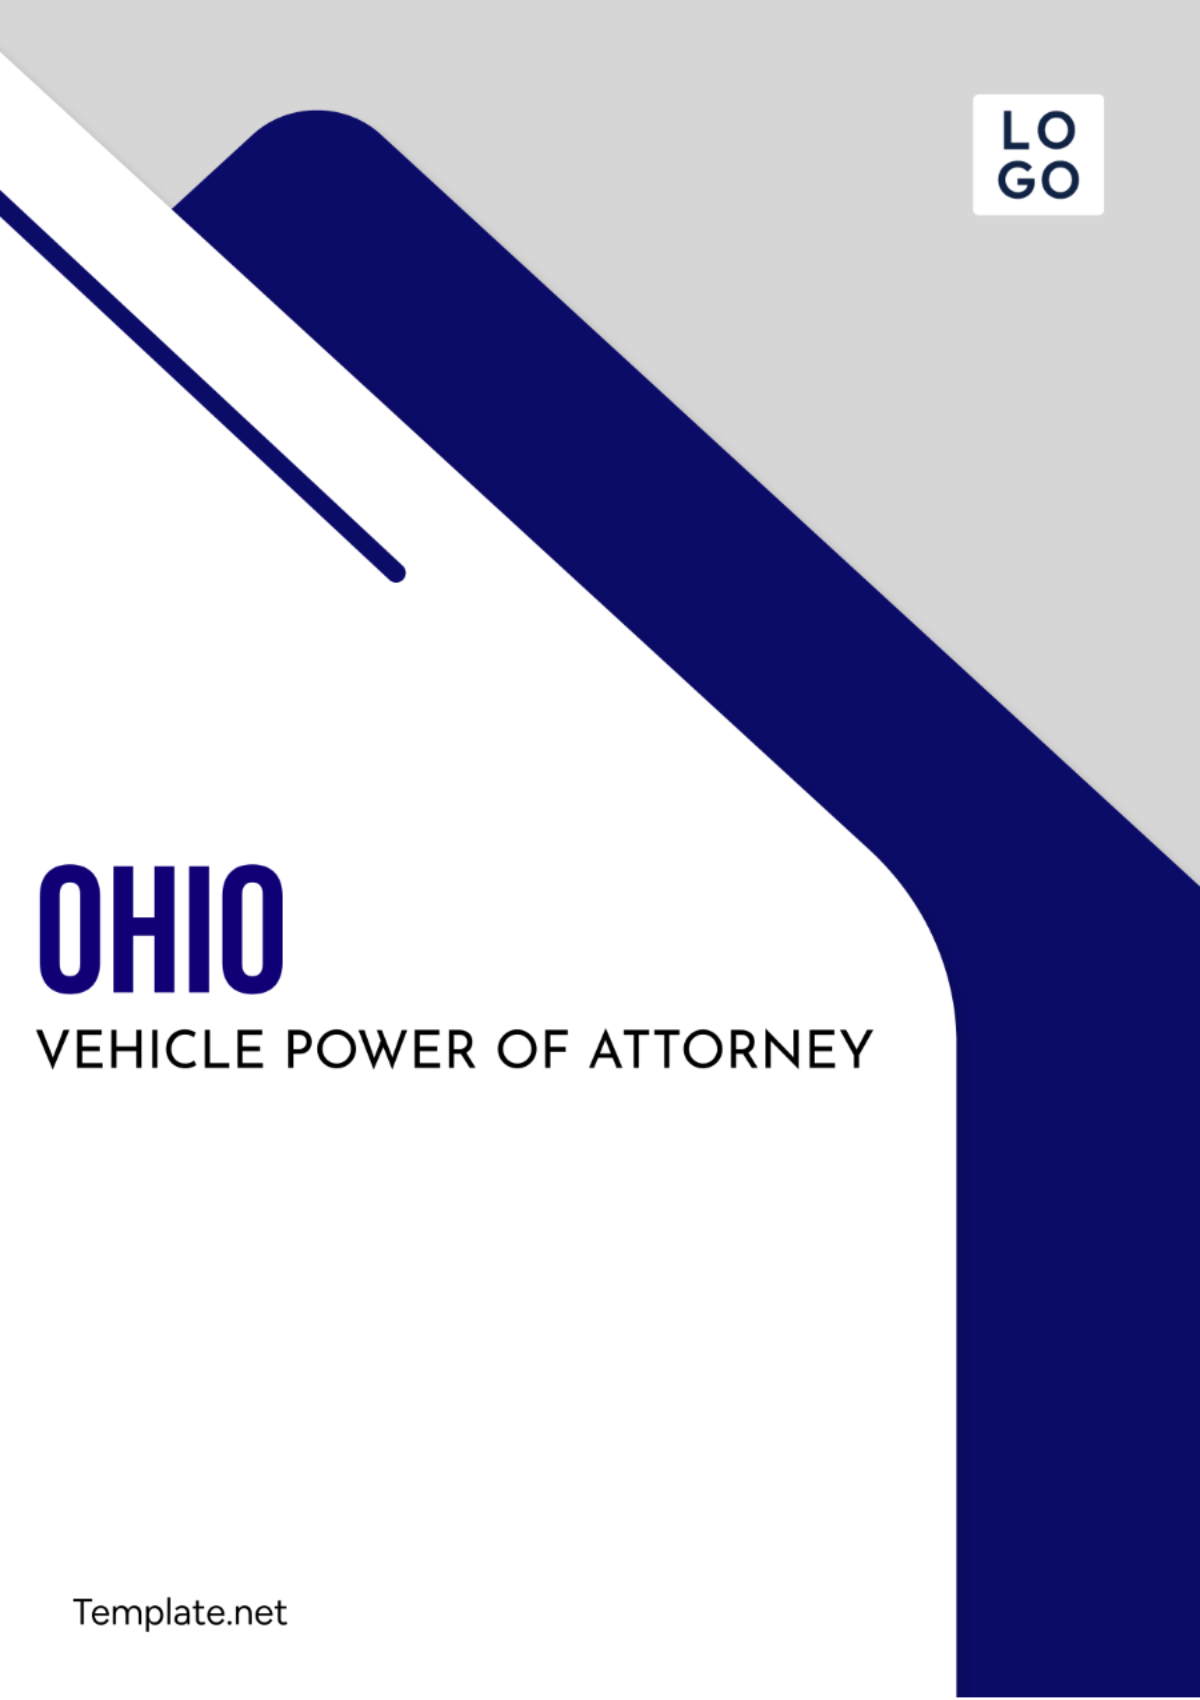 Ohio Vehicle Power of Attorney Template